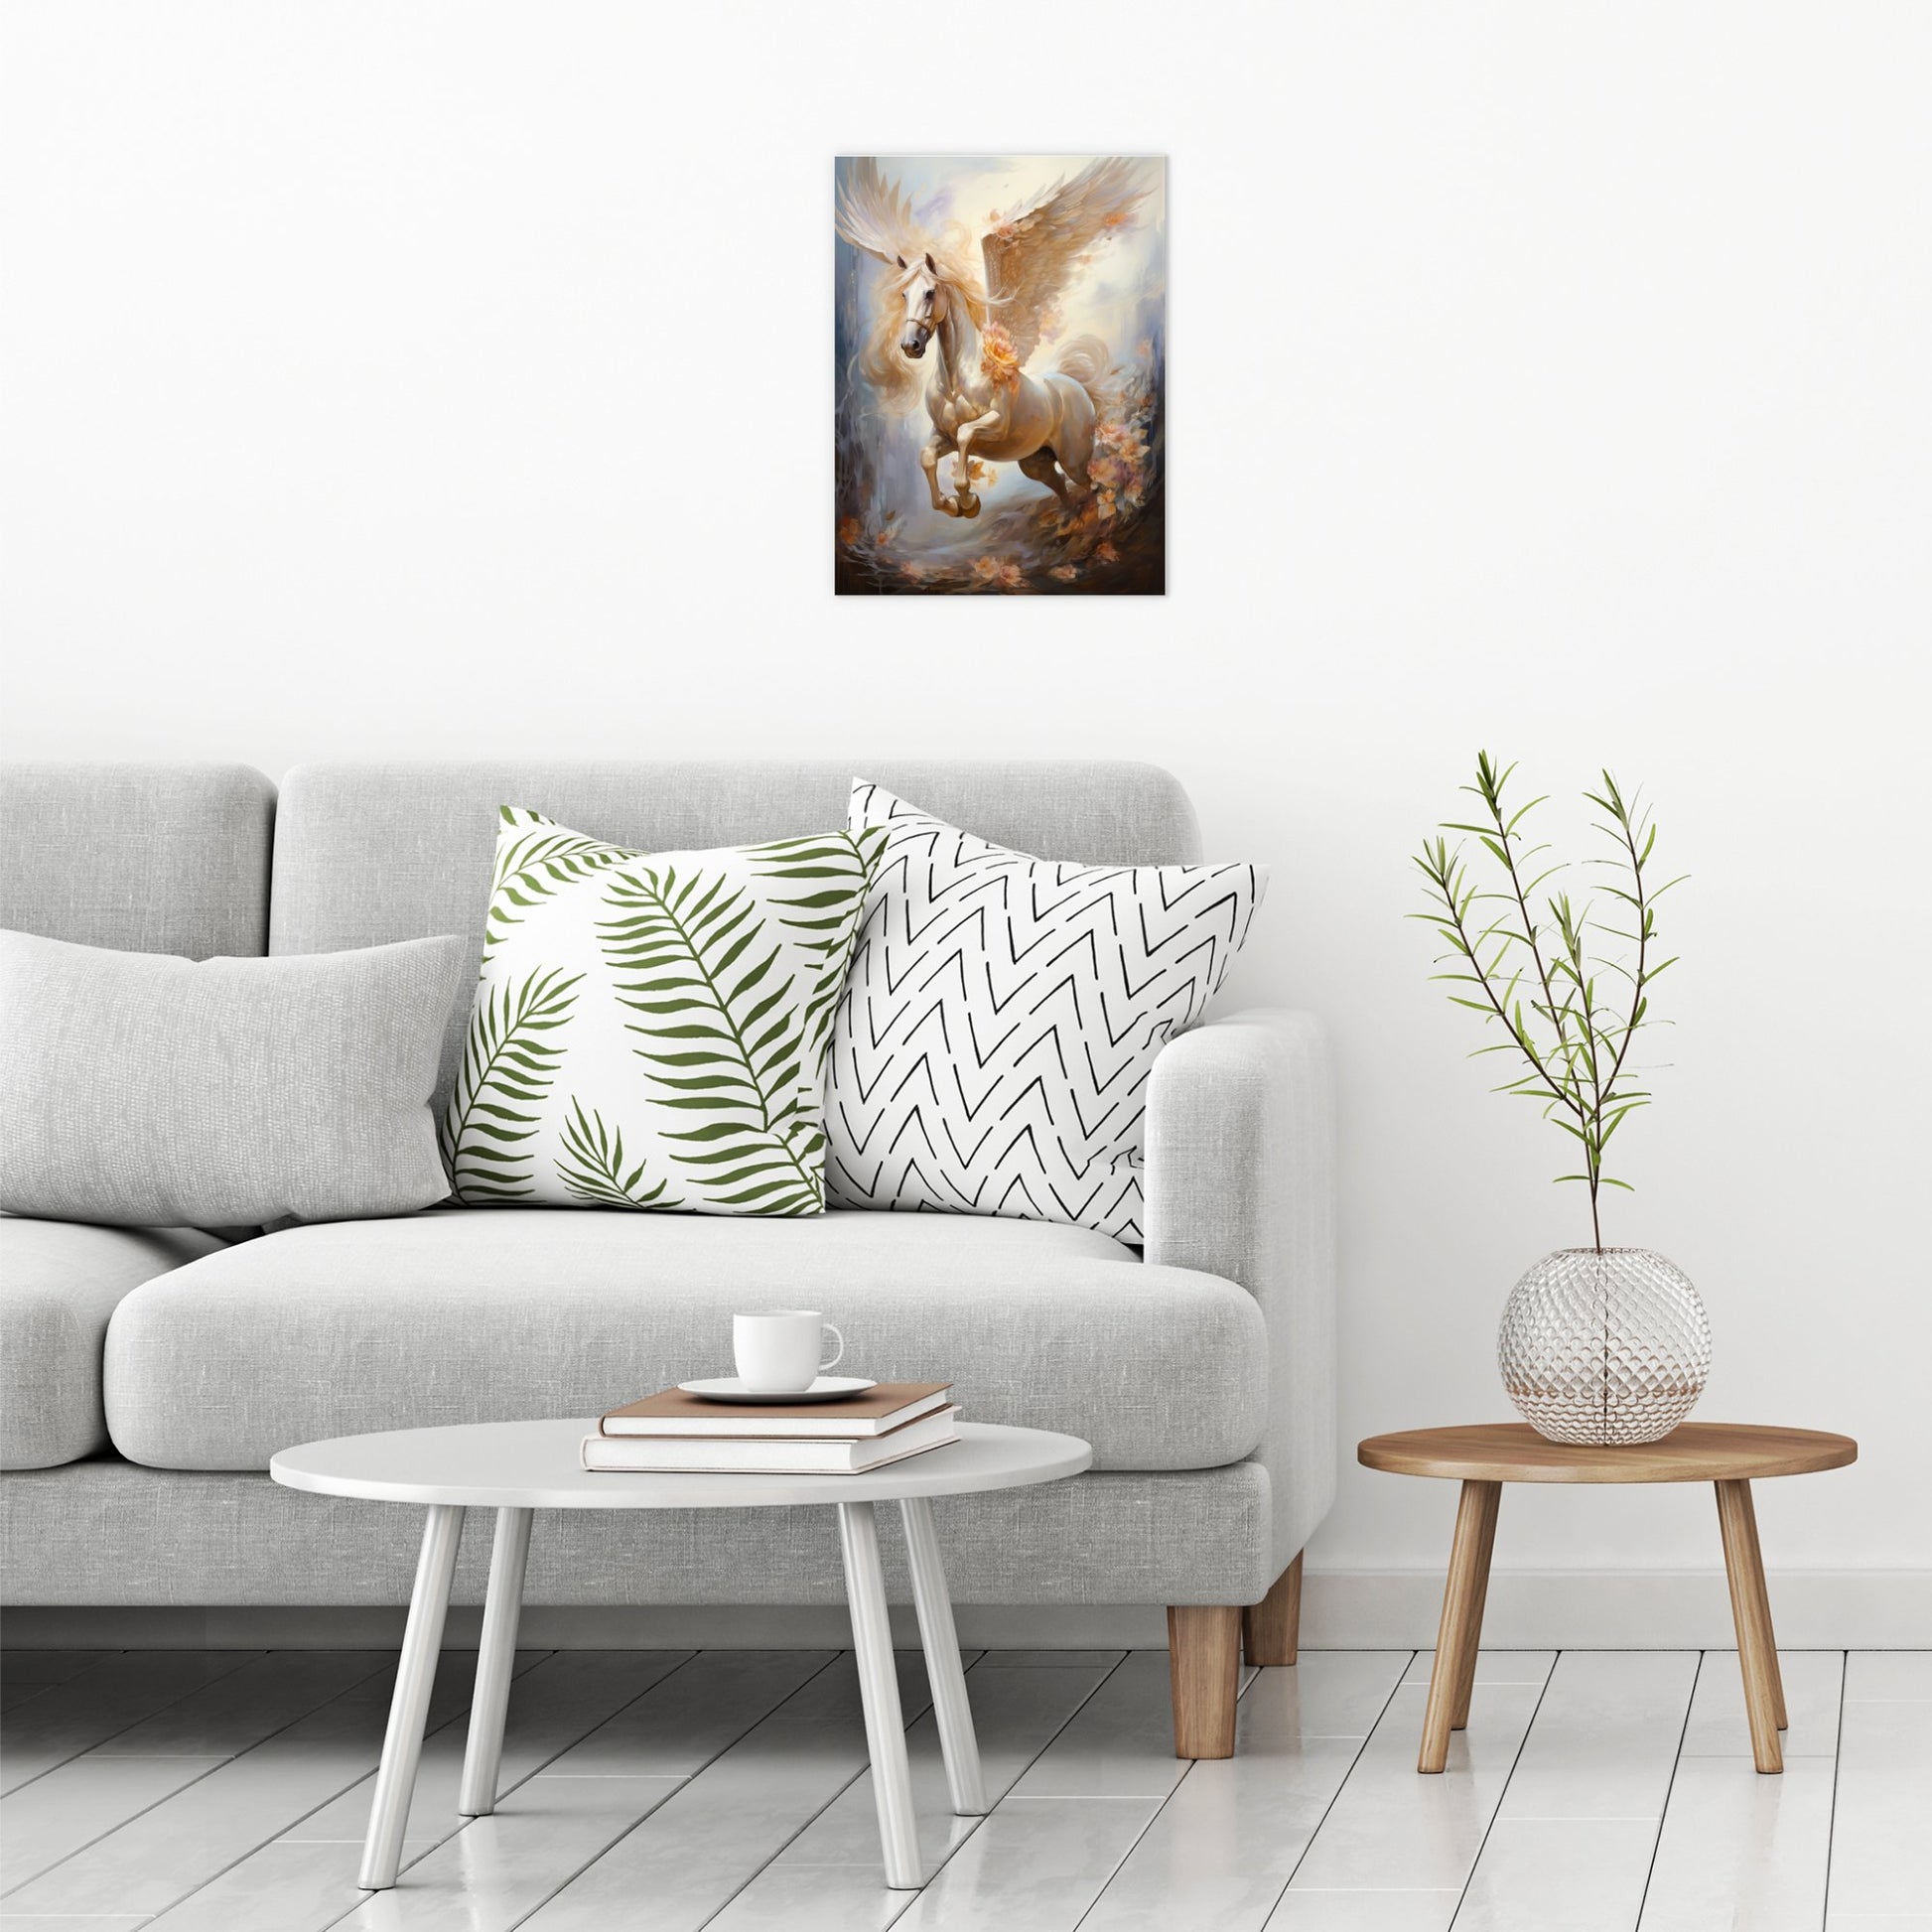 A contemporary modern room view showing a medium size metal art poster display plate with printed design of a Pegasus Flying Horse Fantasy Painting